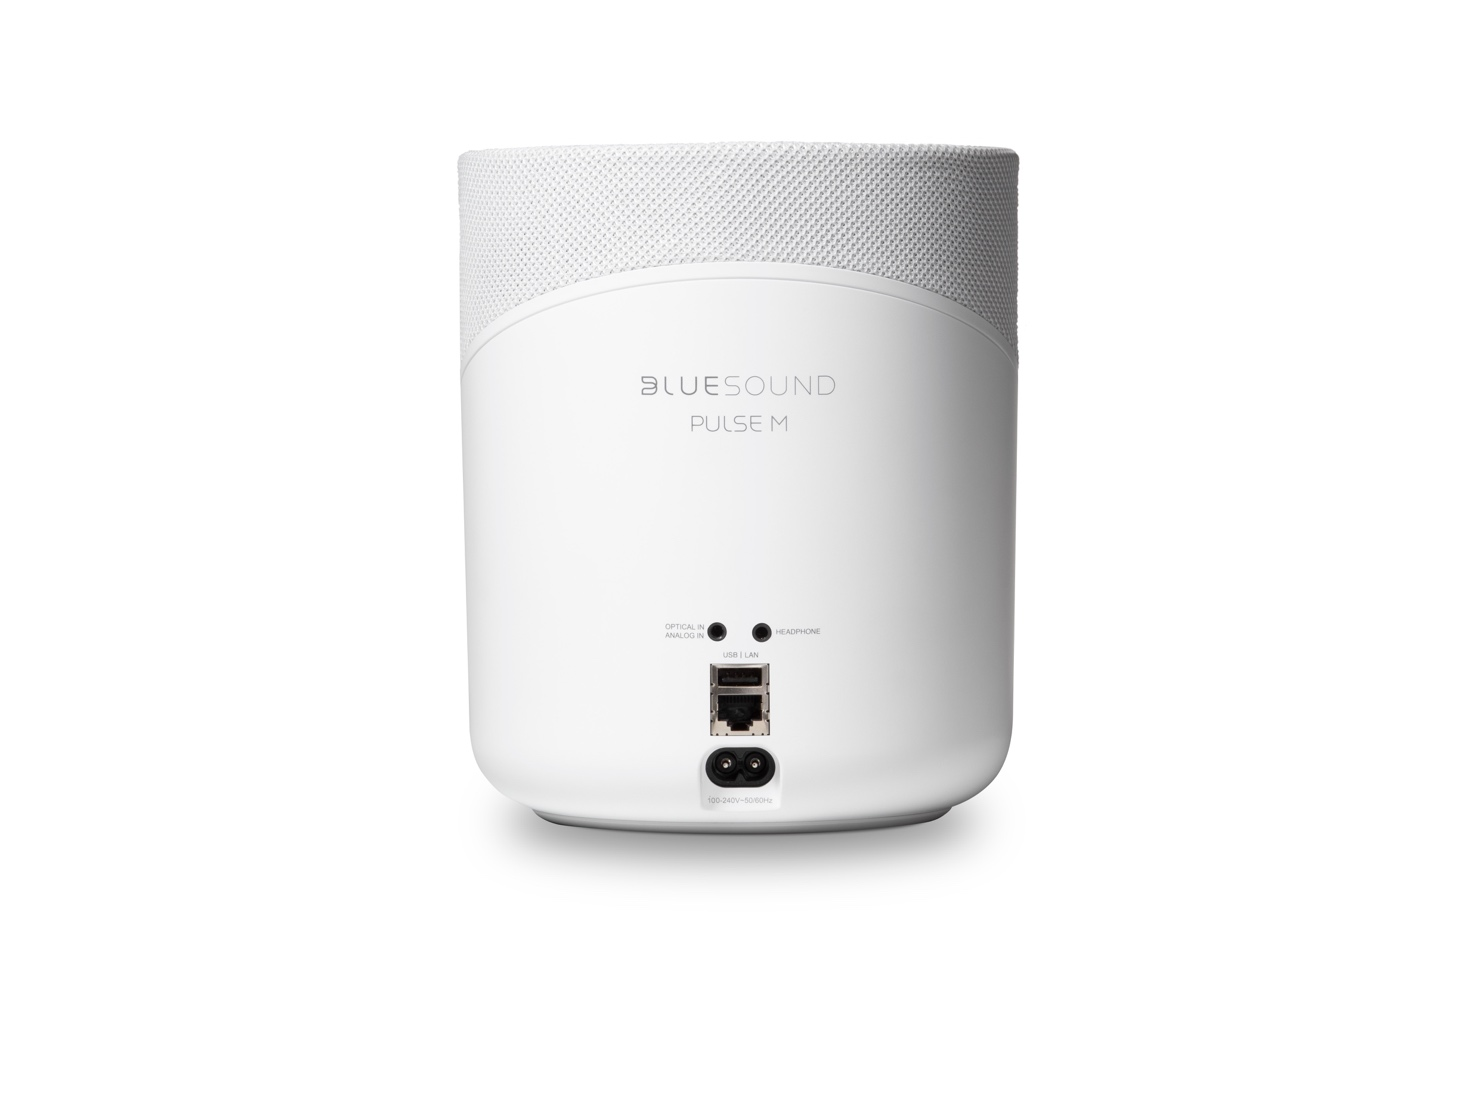 Bluesound Pulse M in white from the rear